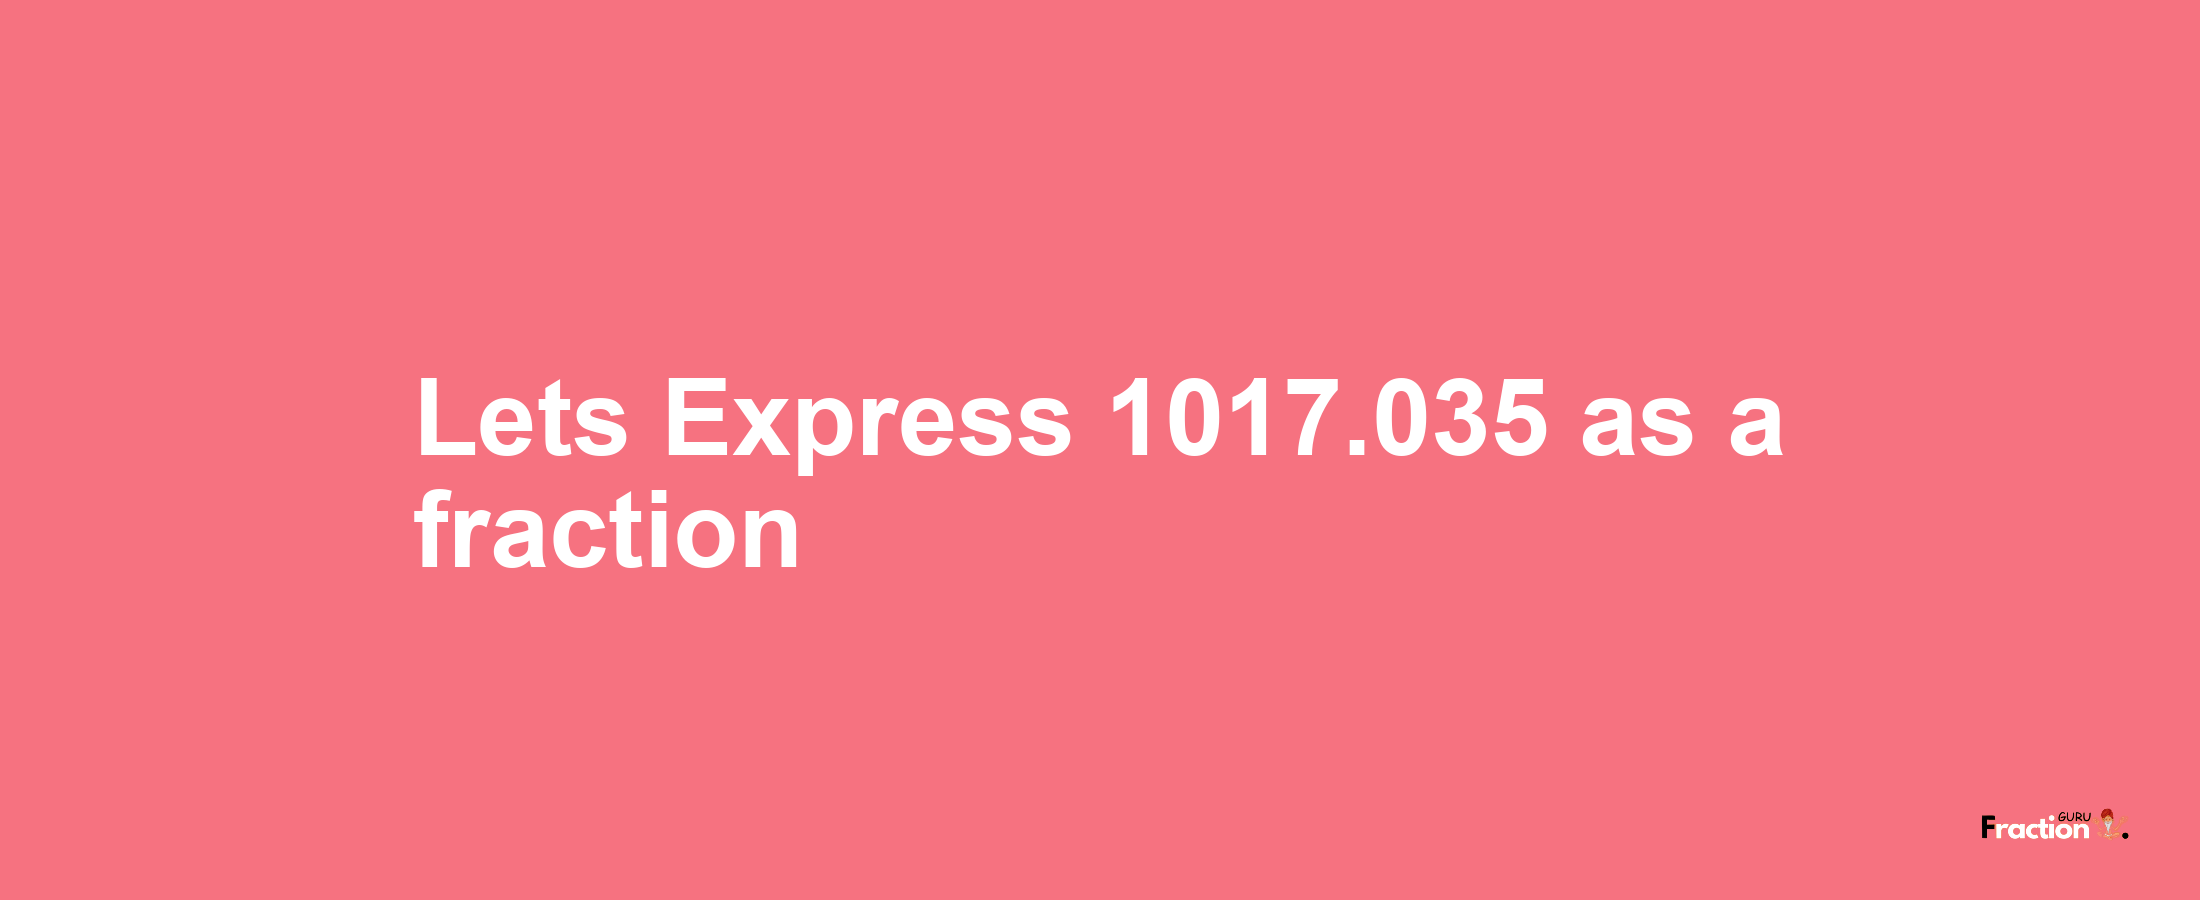 Lets Express 1017.035 as afraction